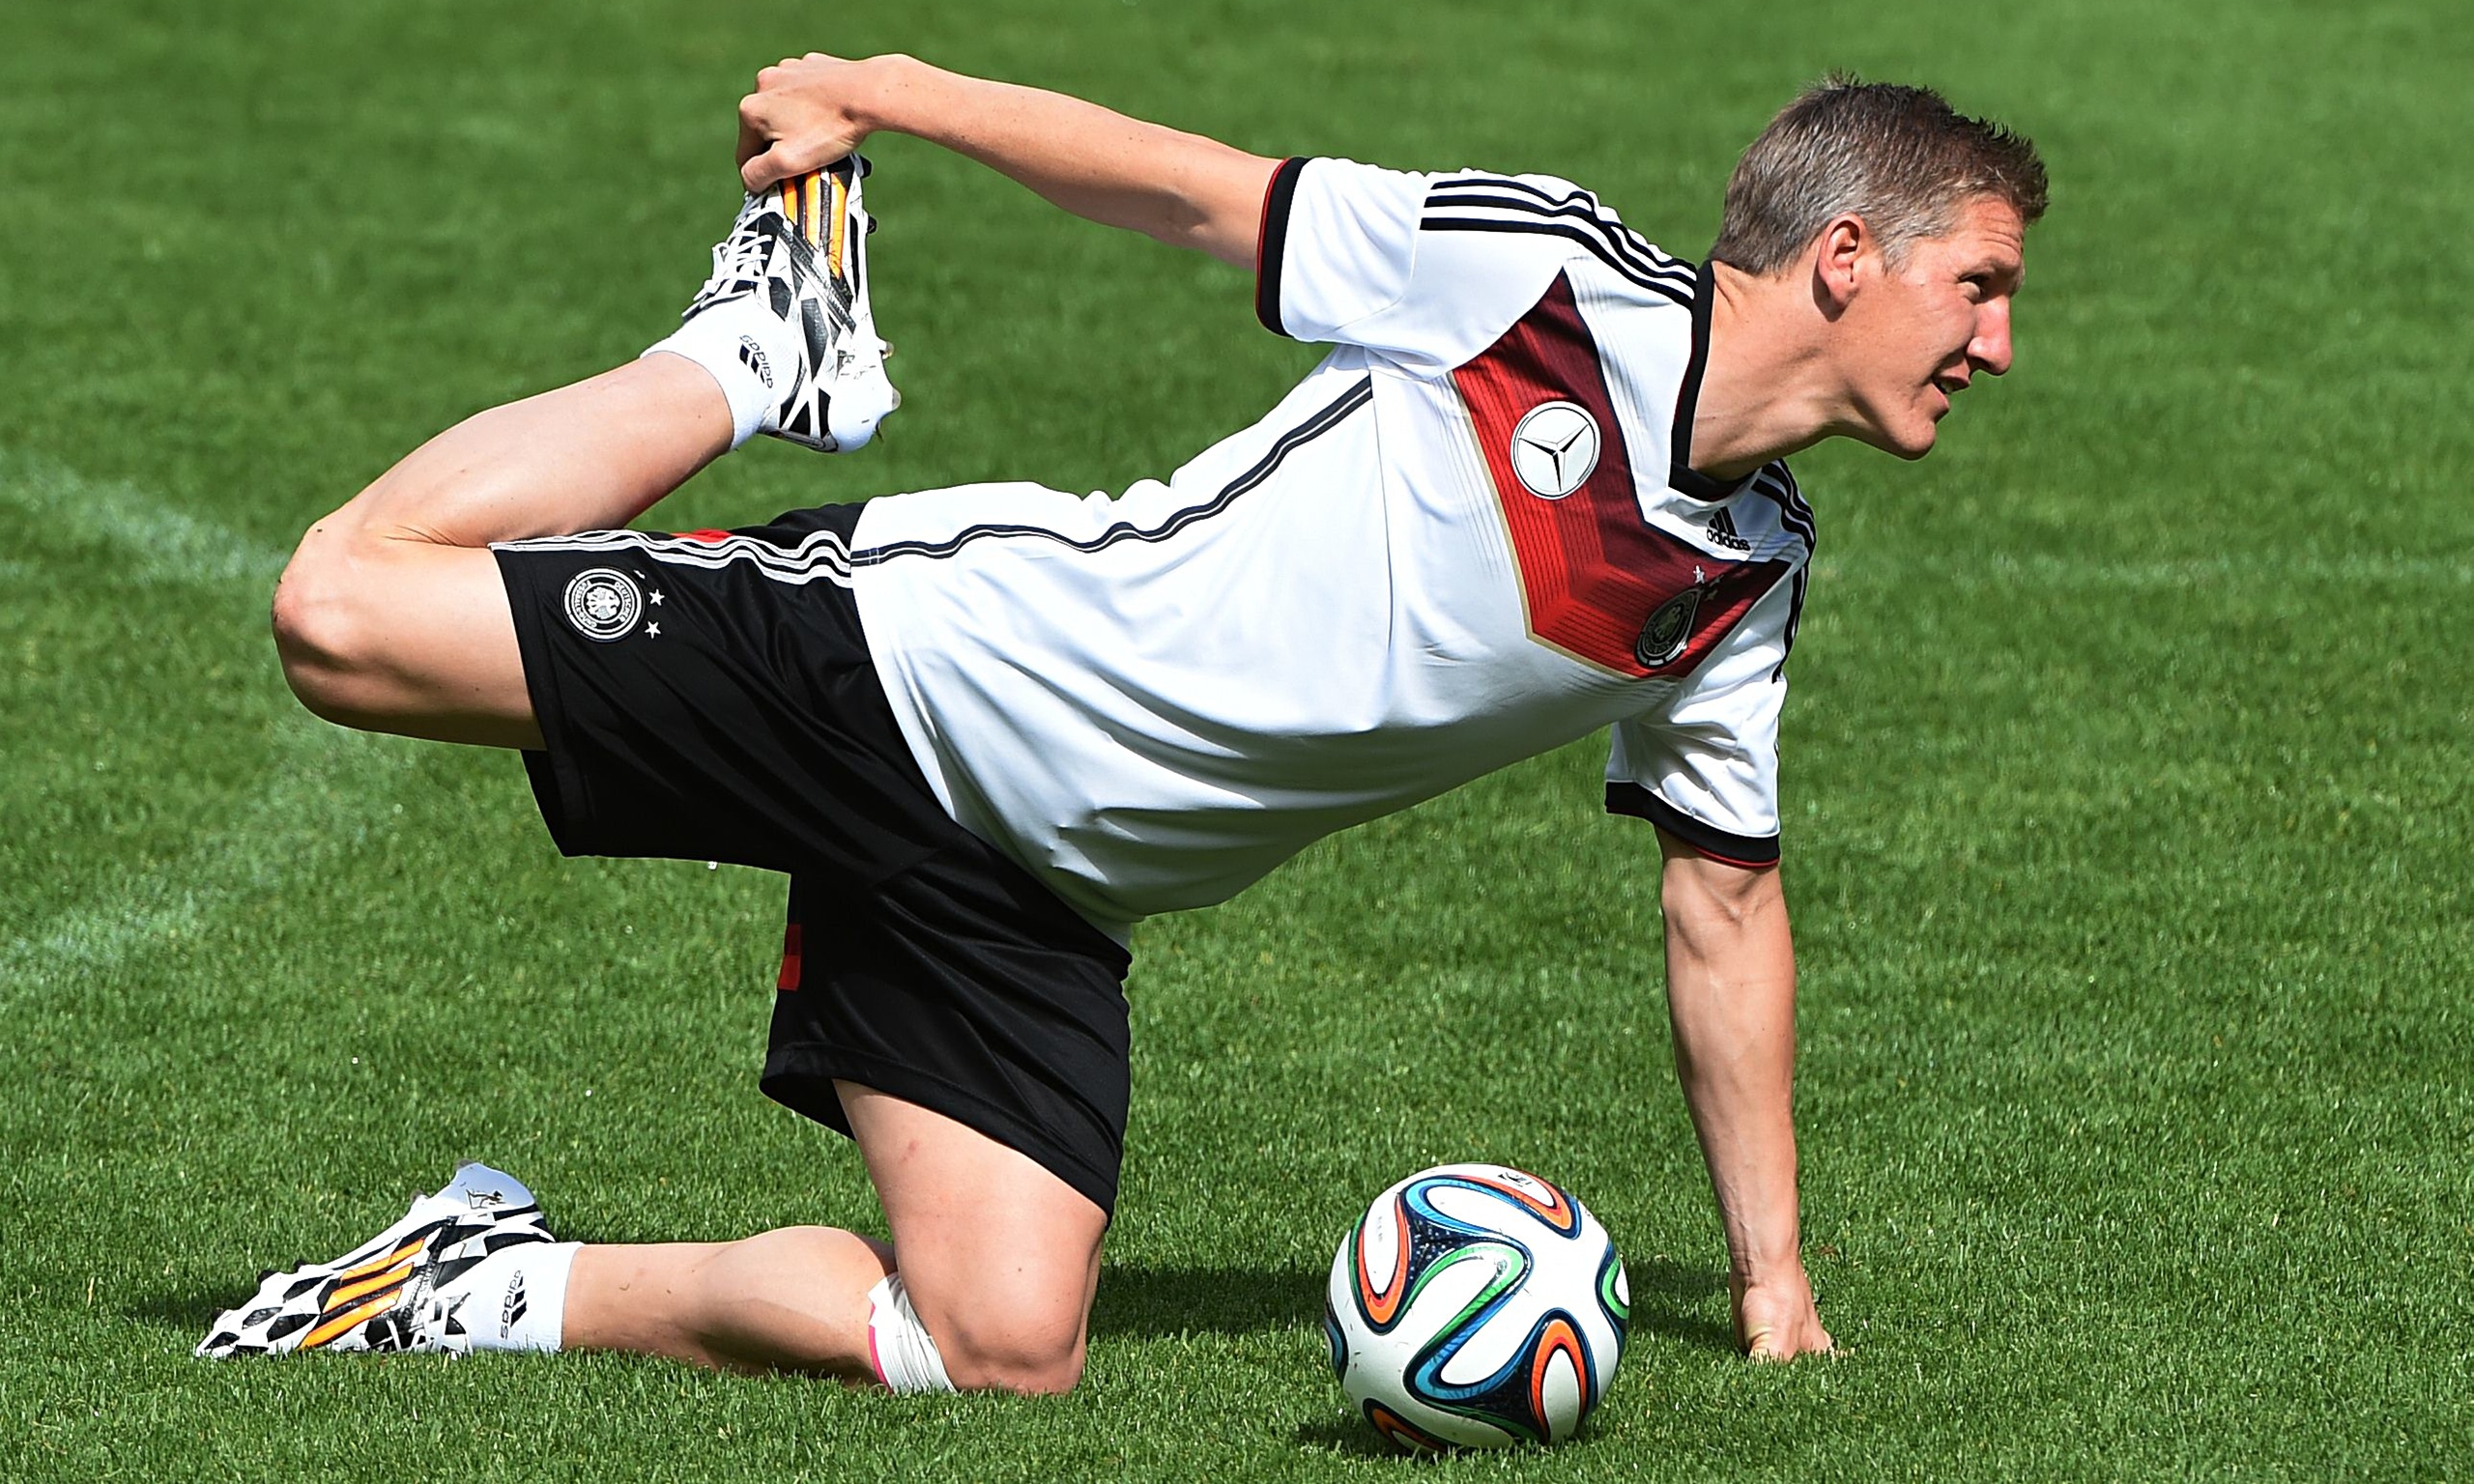 Know about Bastian Schweinsteiger Net and his career,achievements